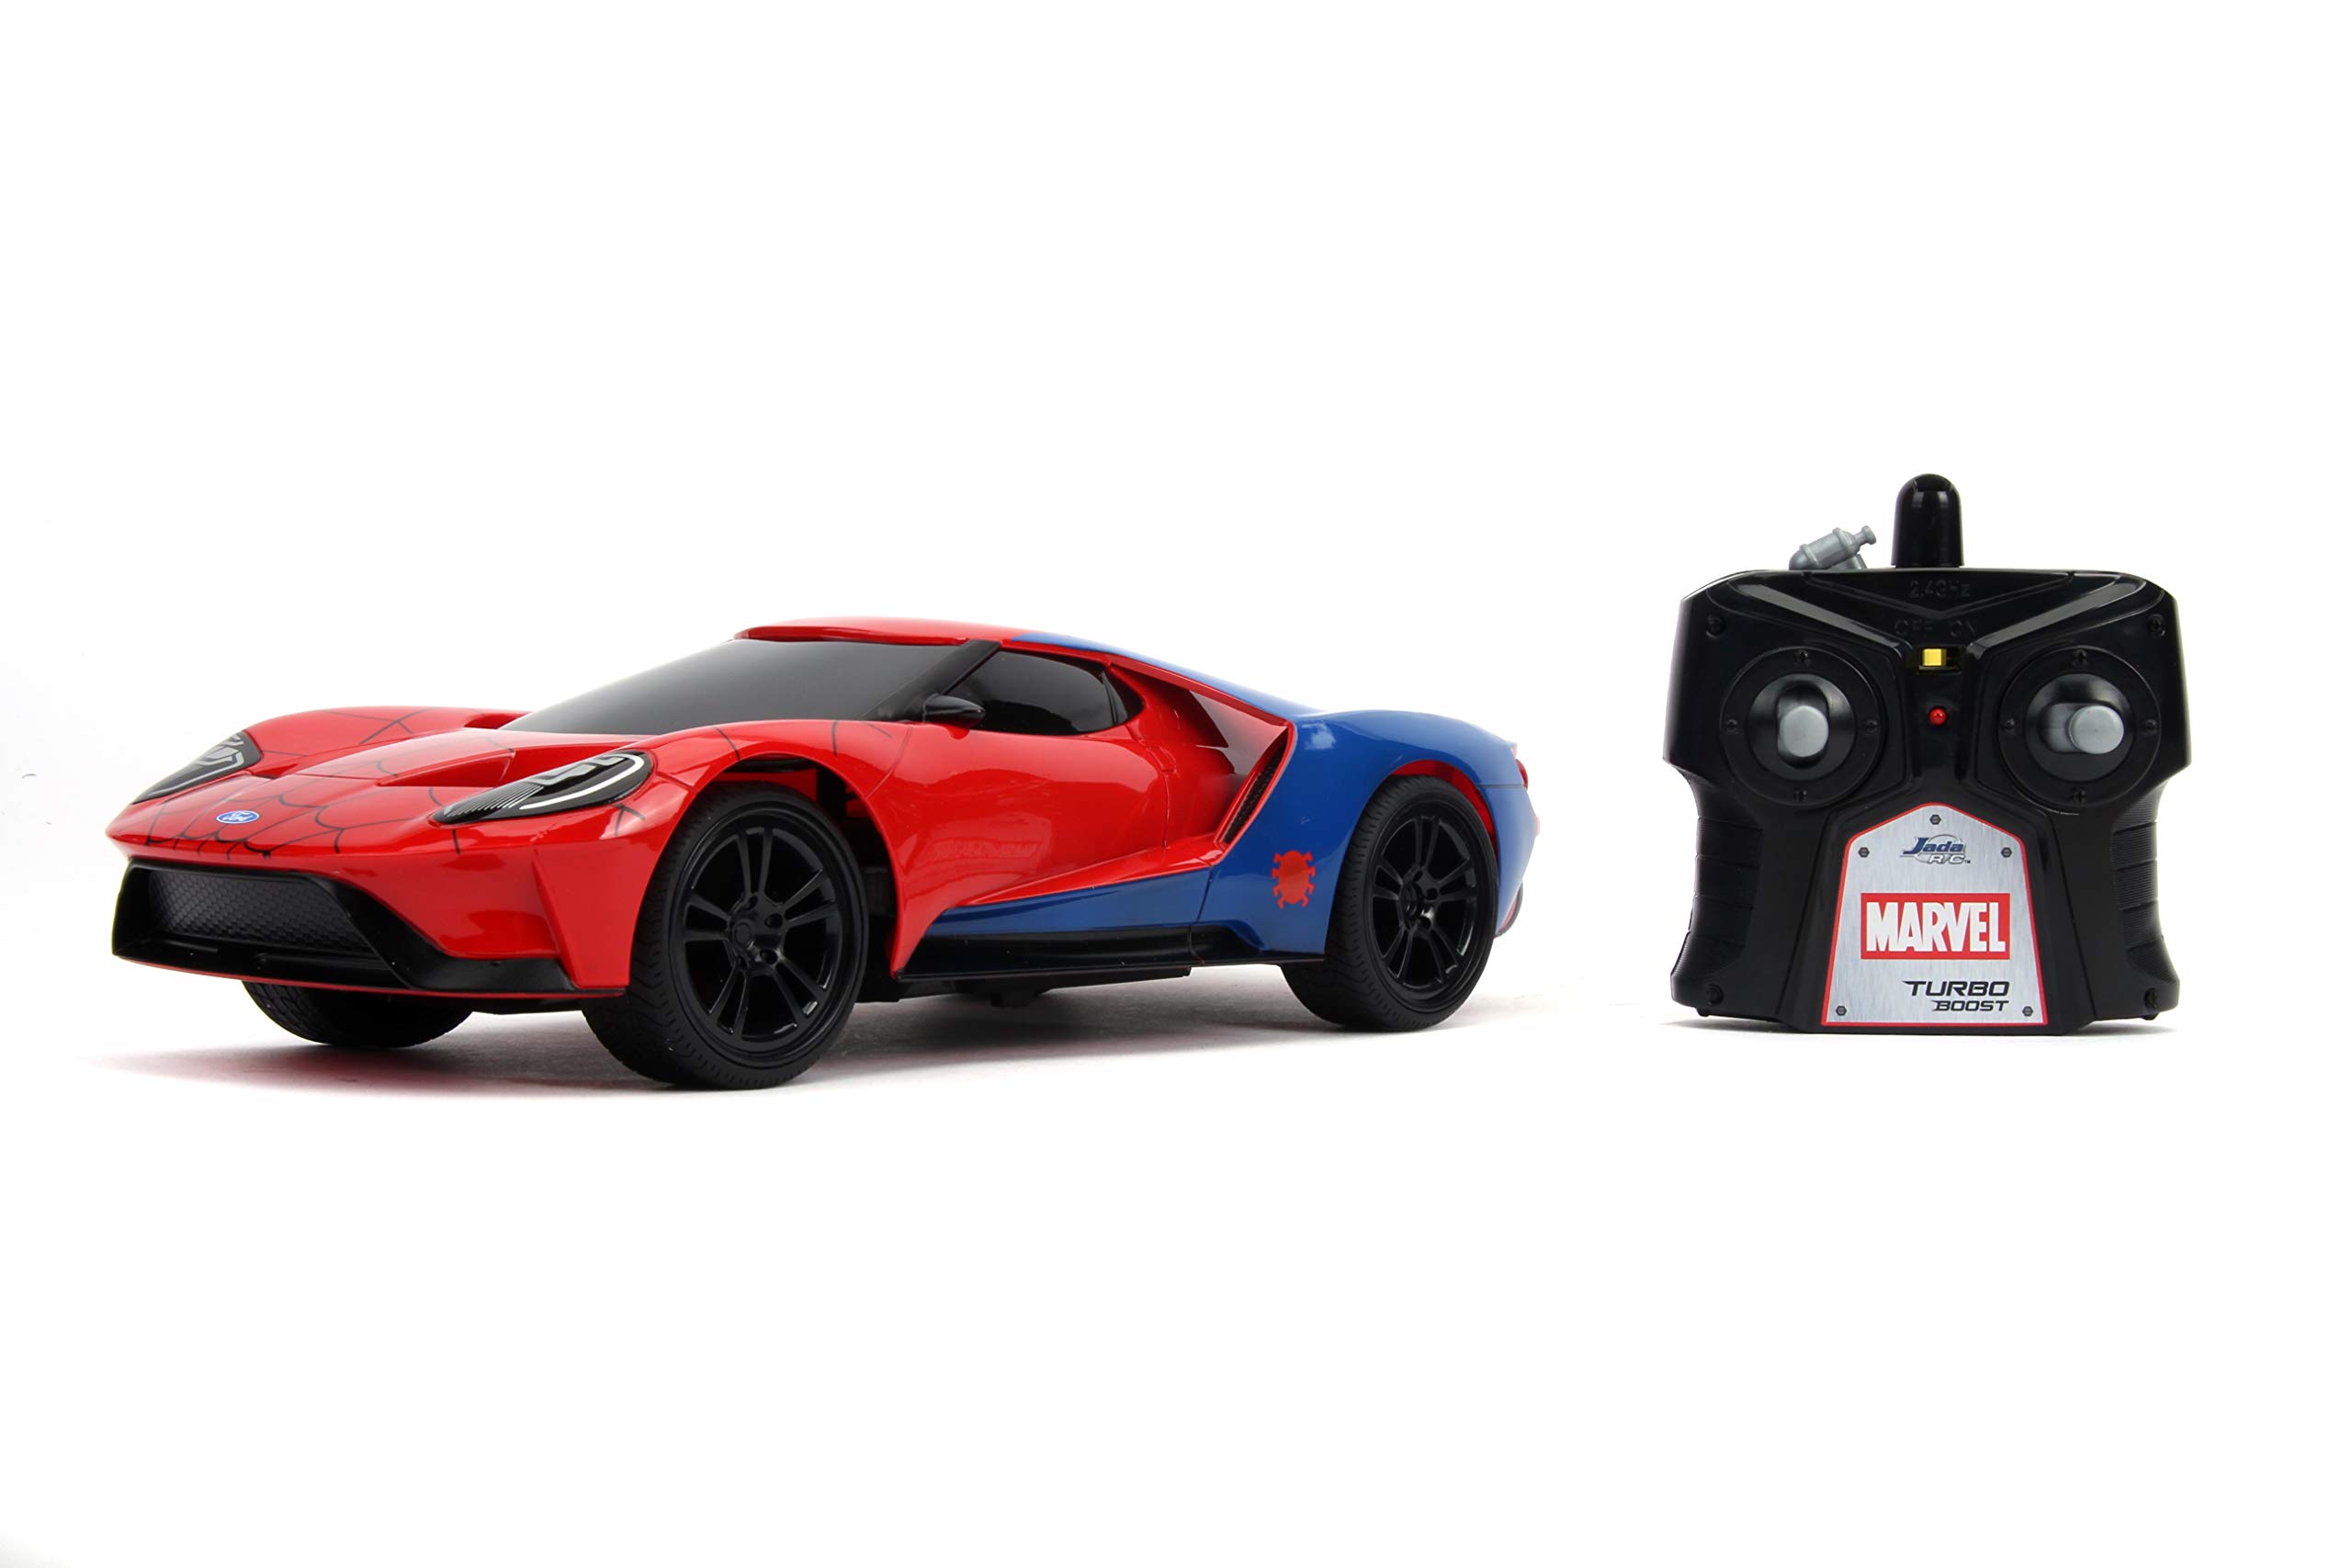 Marvel Spider-Man 1:16 2017 Ford GT RC Radio Control Cars, Toys for Kids and Adults